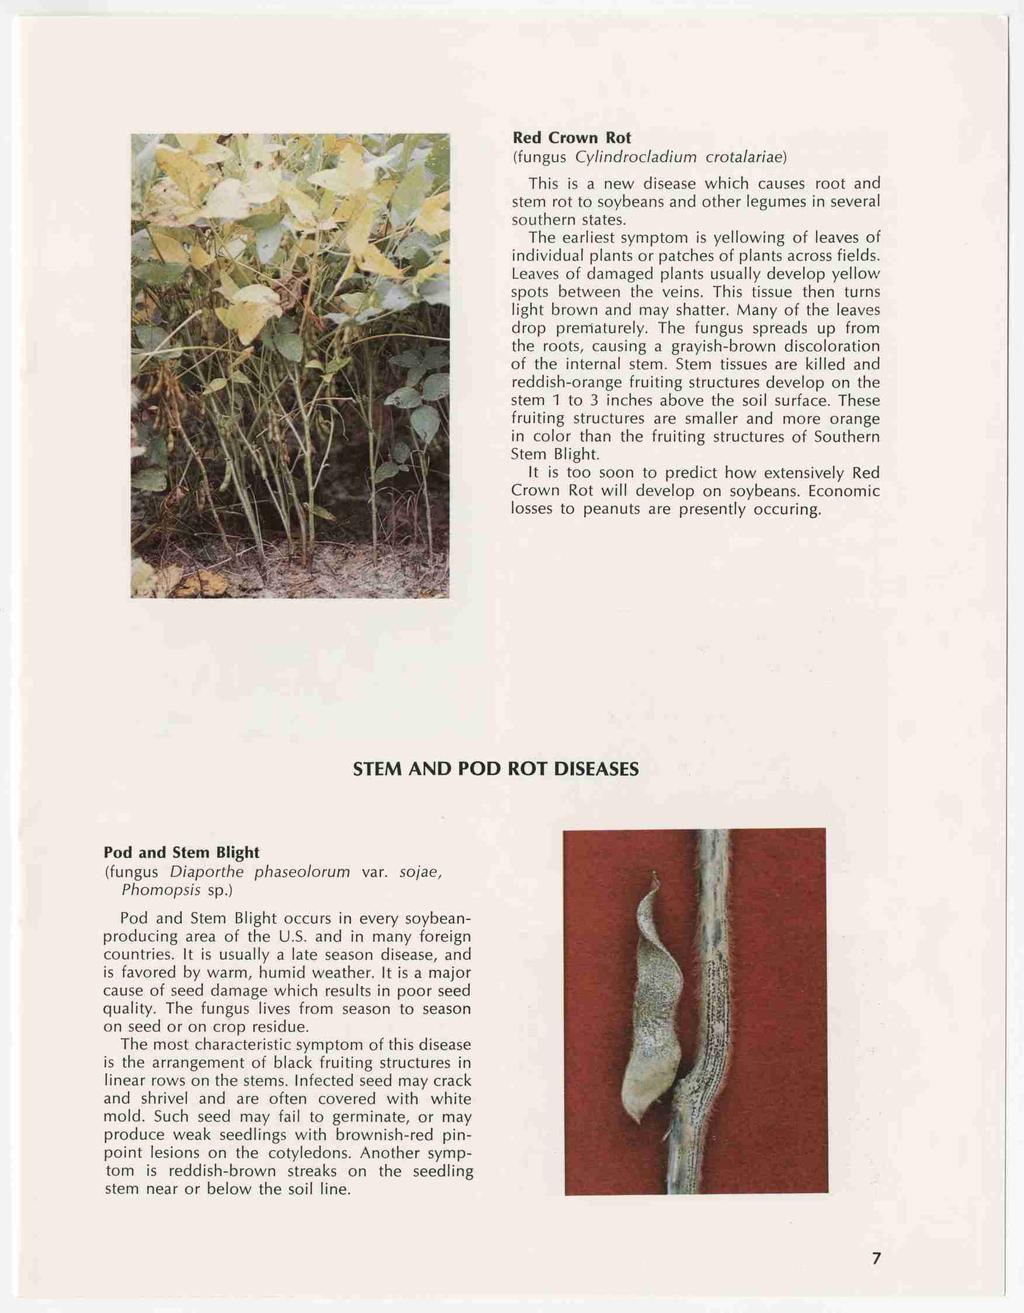 Red Crown Rot (fungus Cylindroc/adium crotalariae) This is a new disease which causes root and stem rot to soybeans and other legumes in several southern states.